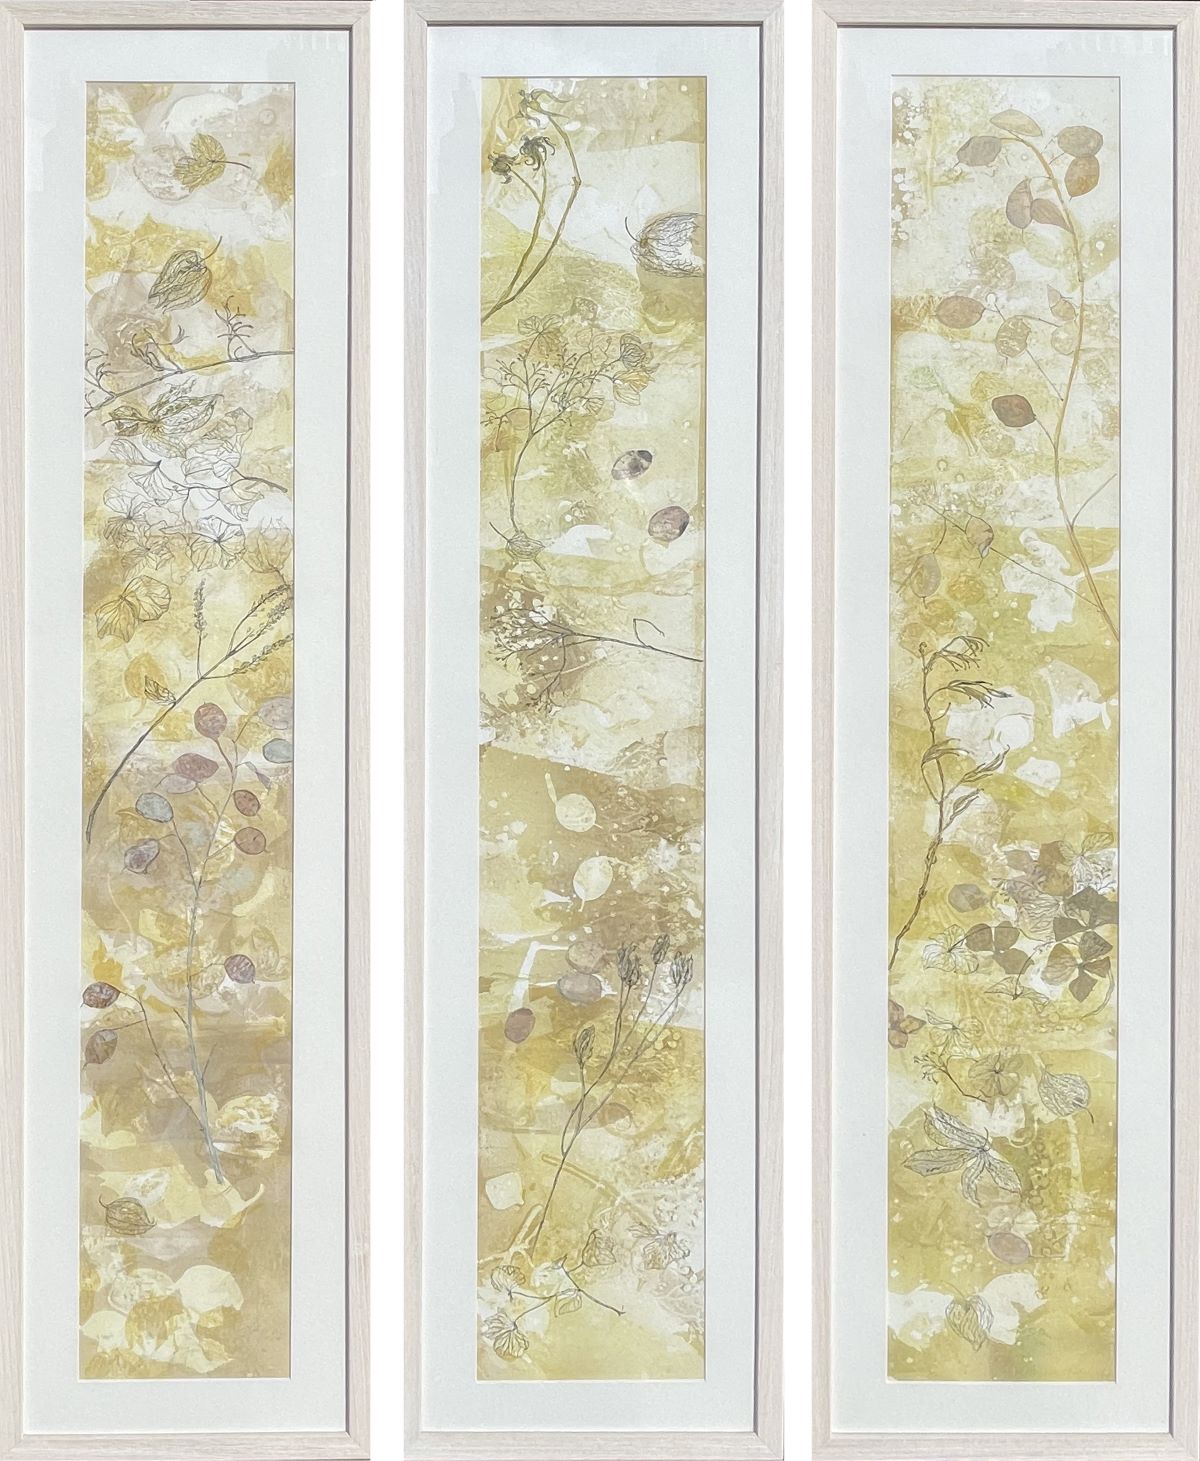 Autumn Seeds. (reduced) Triptych. Gel print, ink drawing detail 124(h) x 30 cm